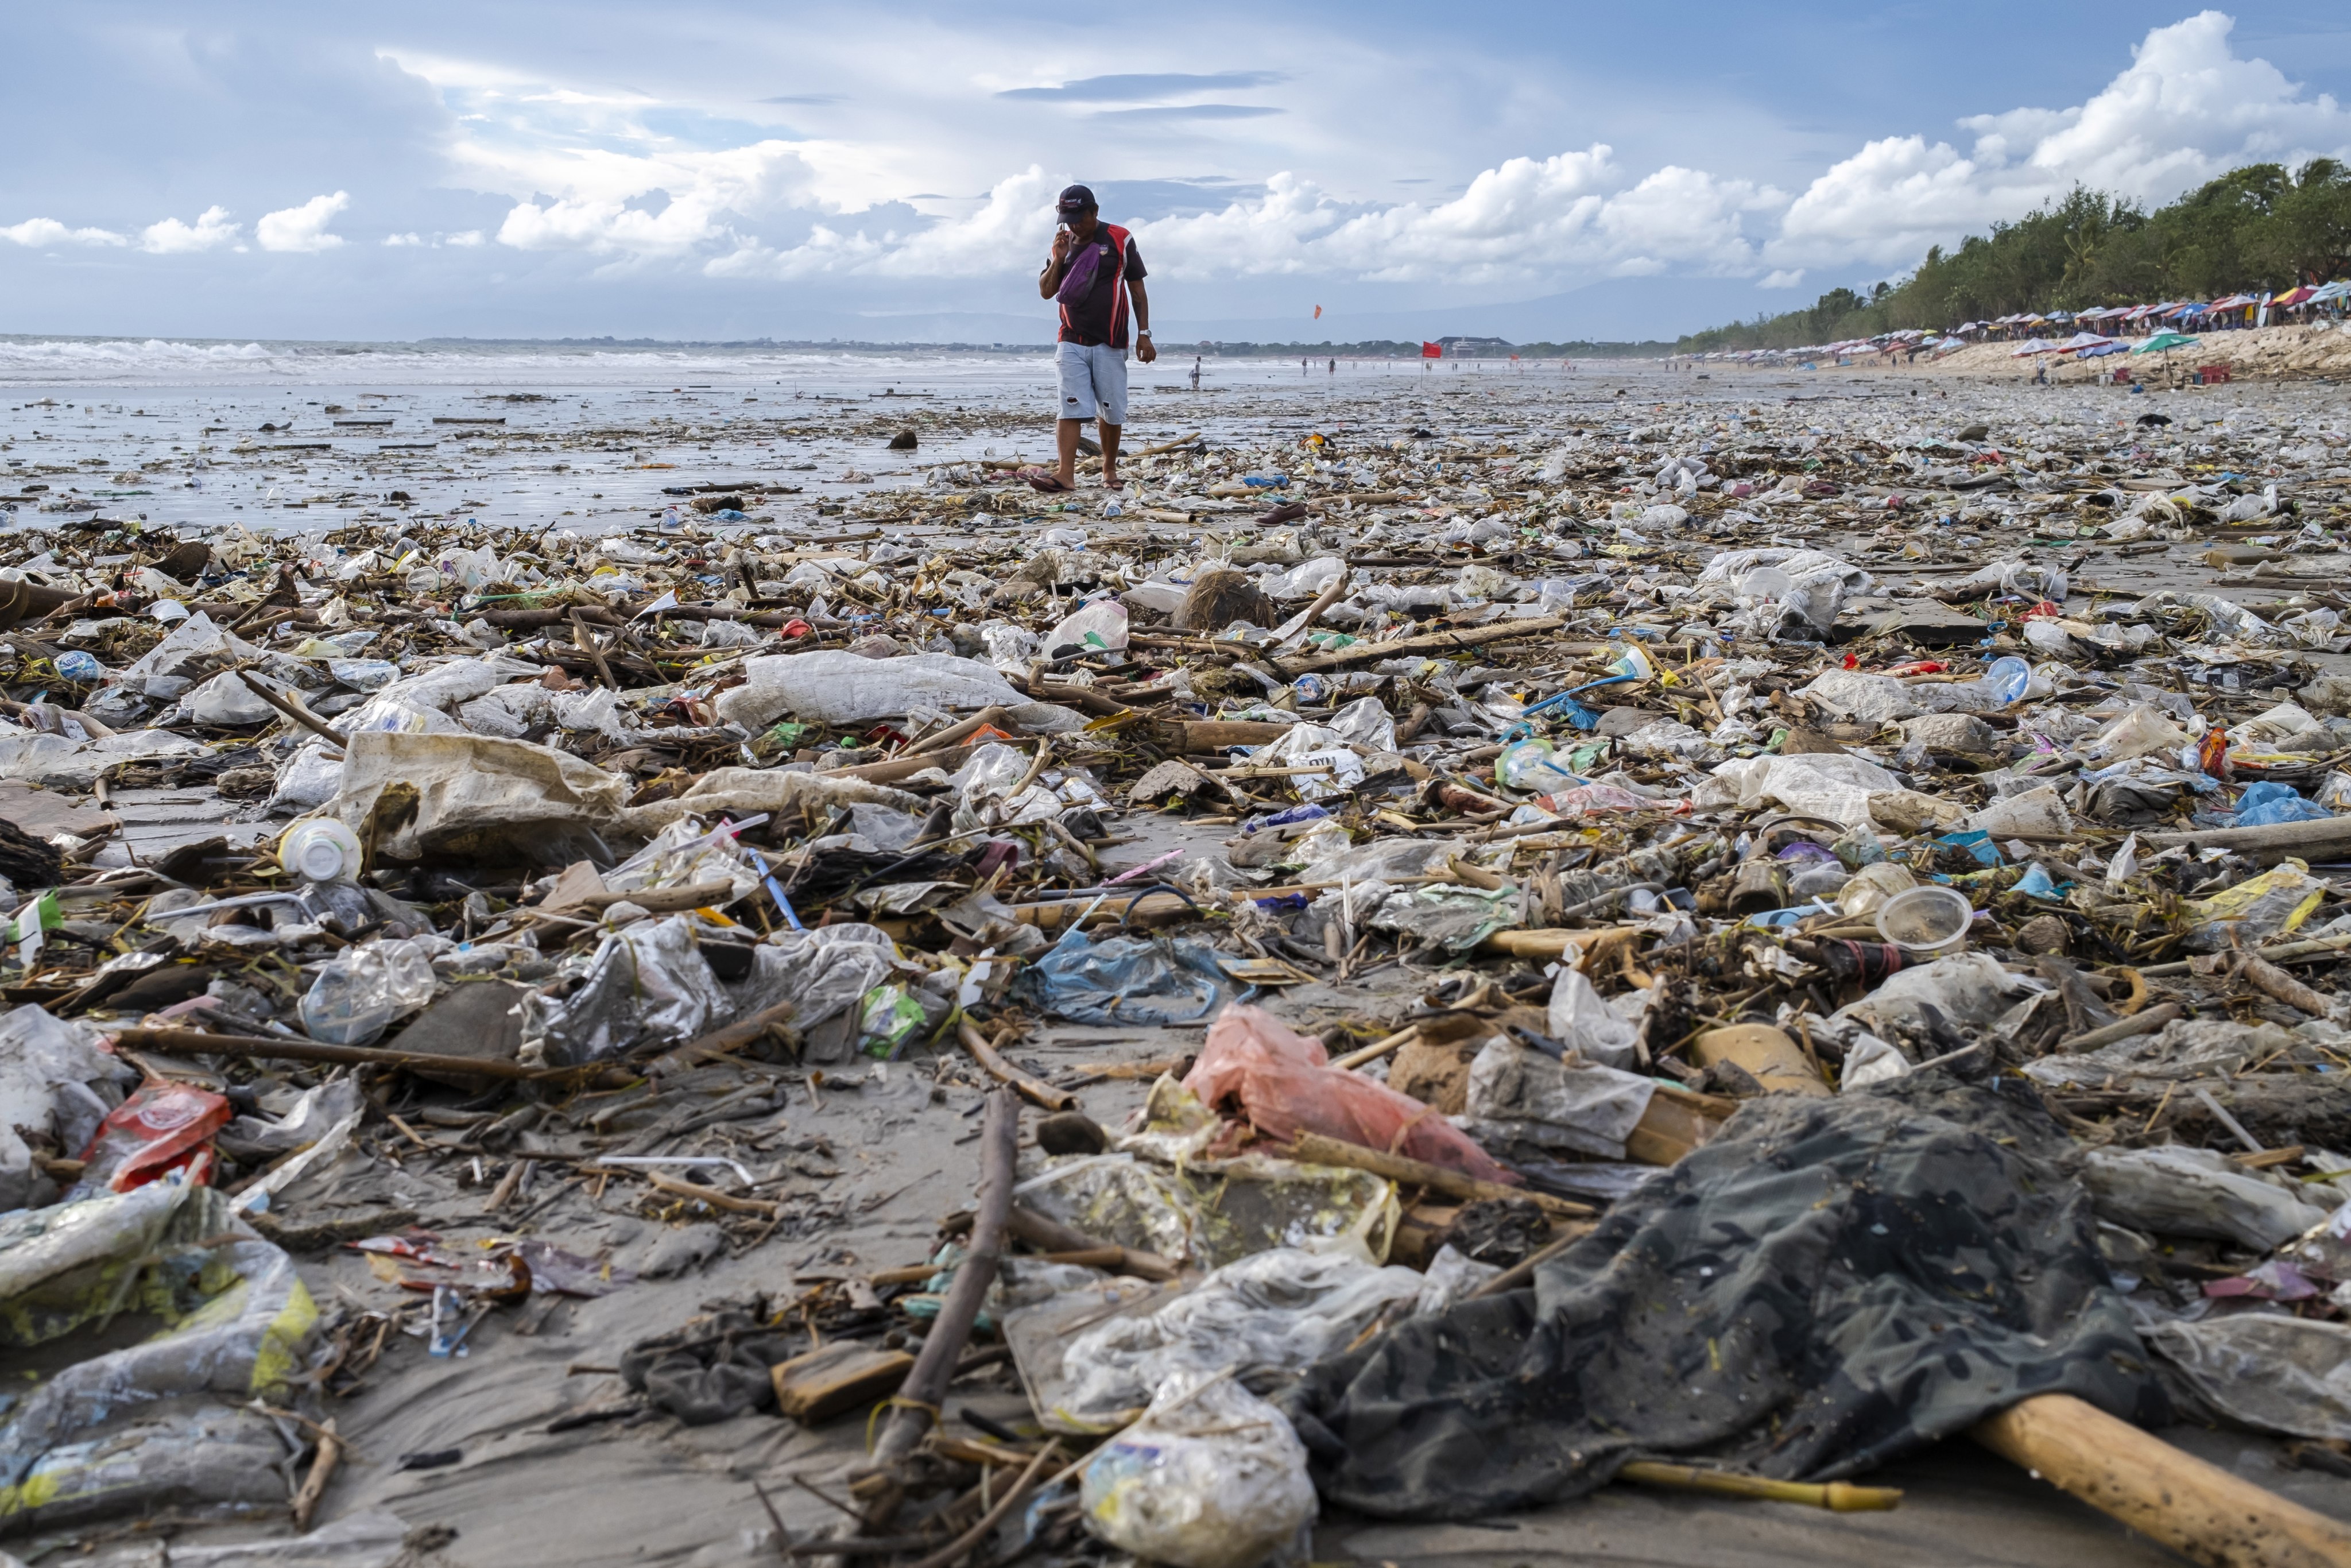 A man walks among waste washed ashore in Bali, Indonesia, in April. Photo: EPA-EFE